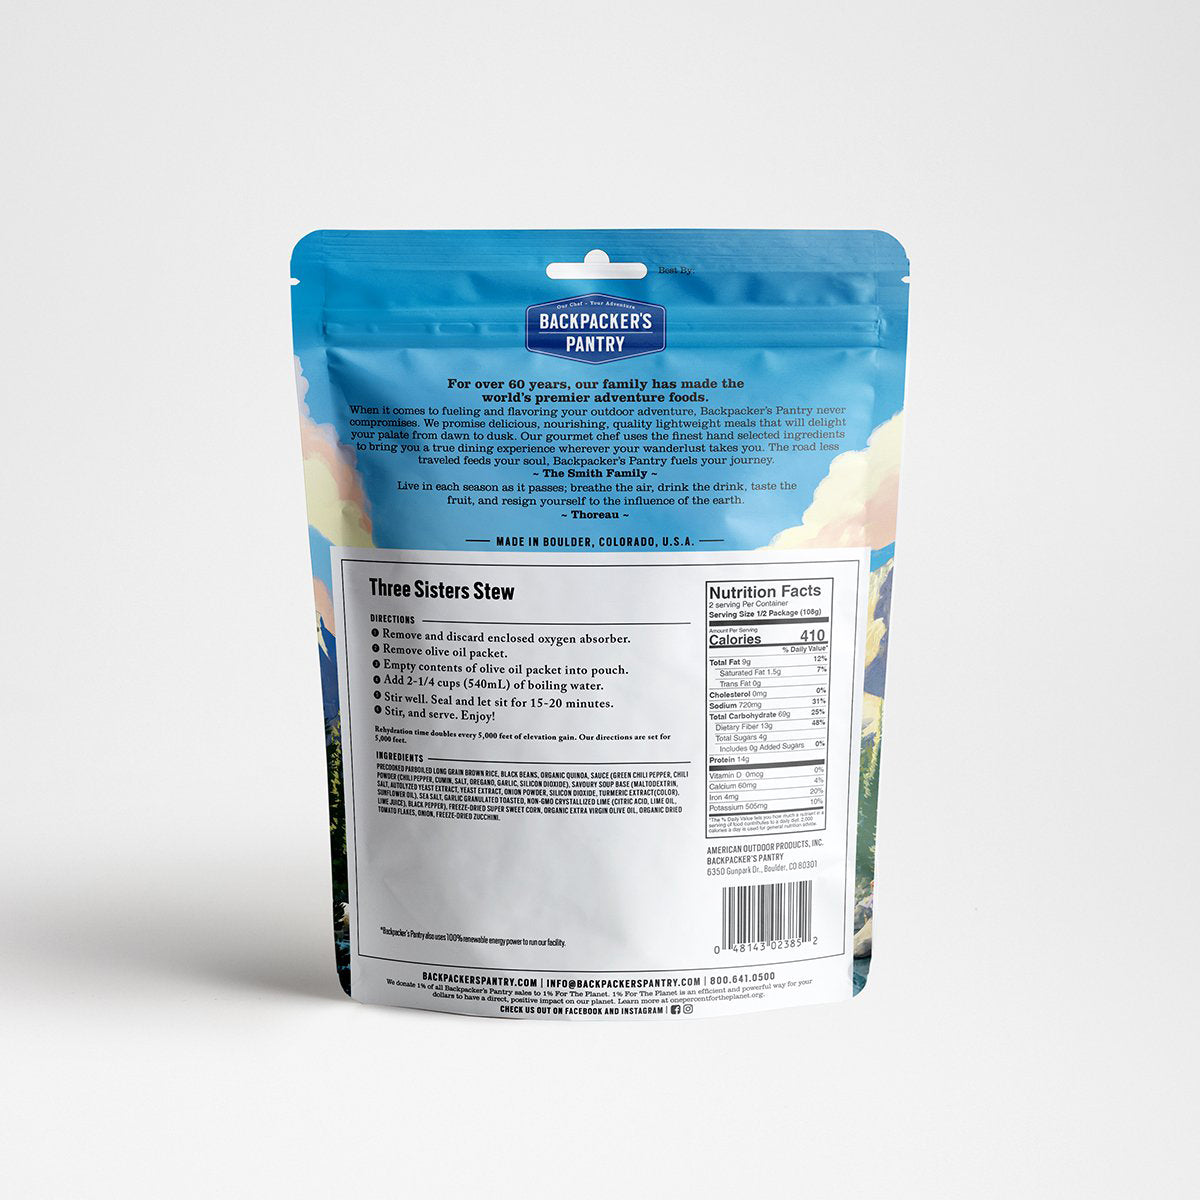 A photo of Backpackers Pantry three sisters stew packaging, the back of the package